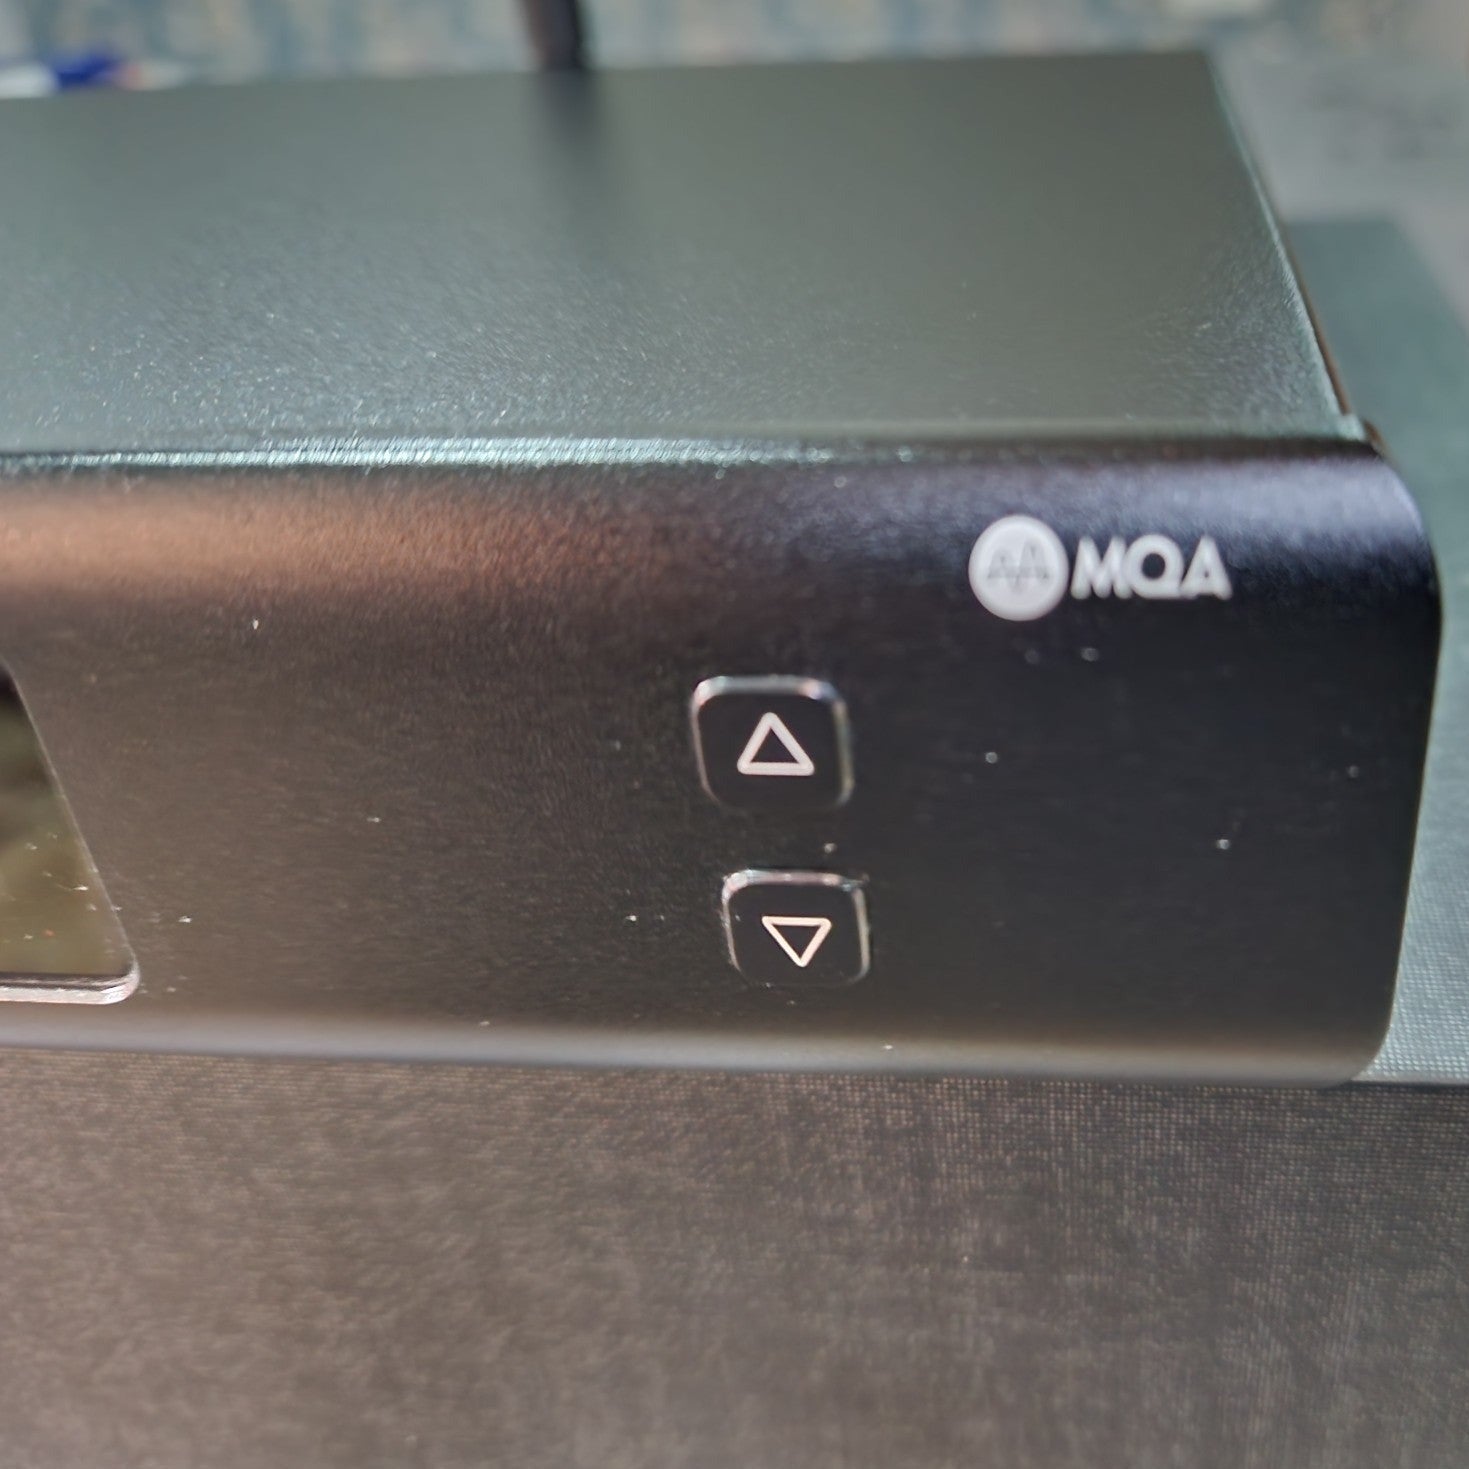 TOPPING - D90 (MQA) (Pre-Owned)